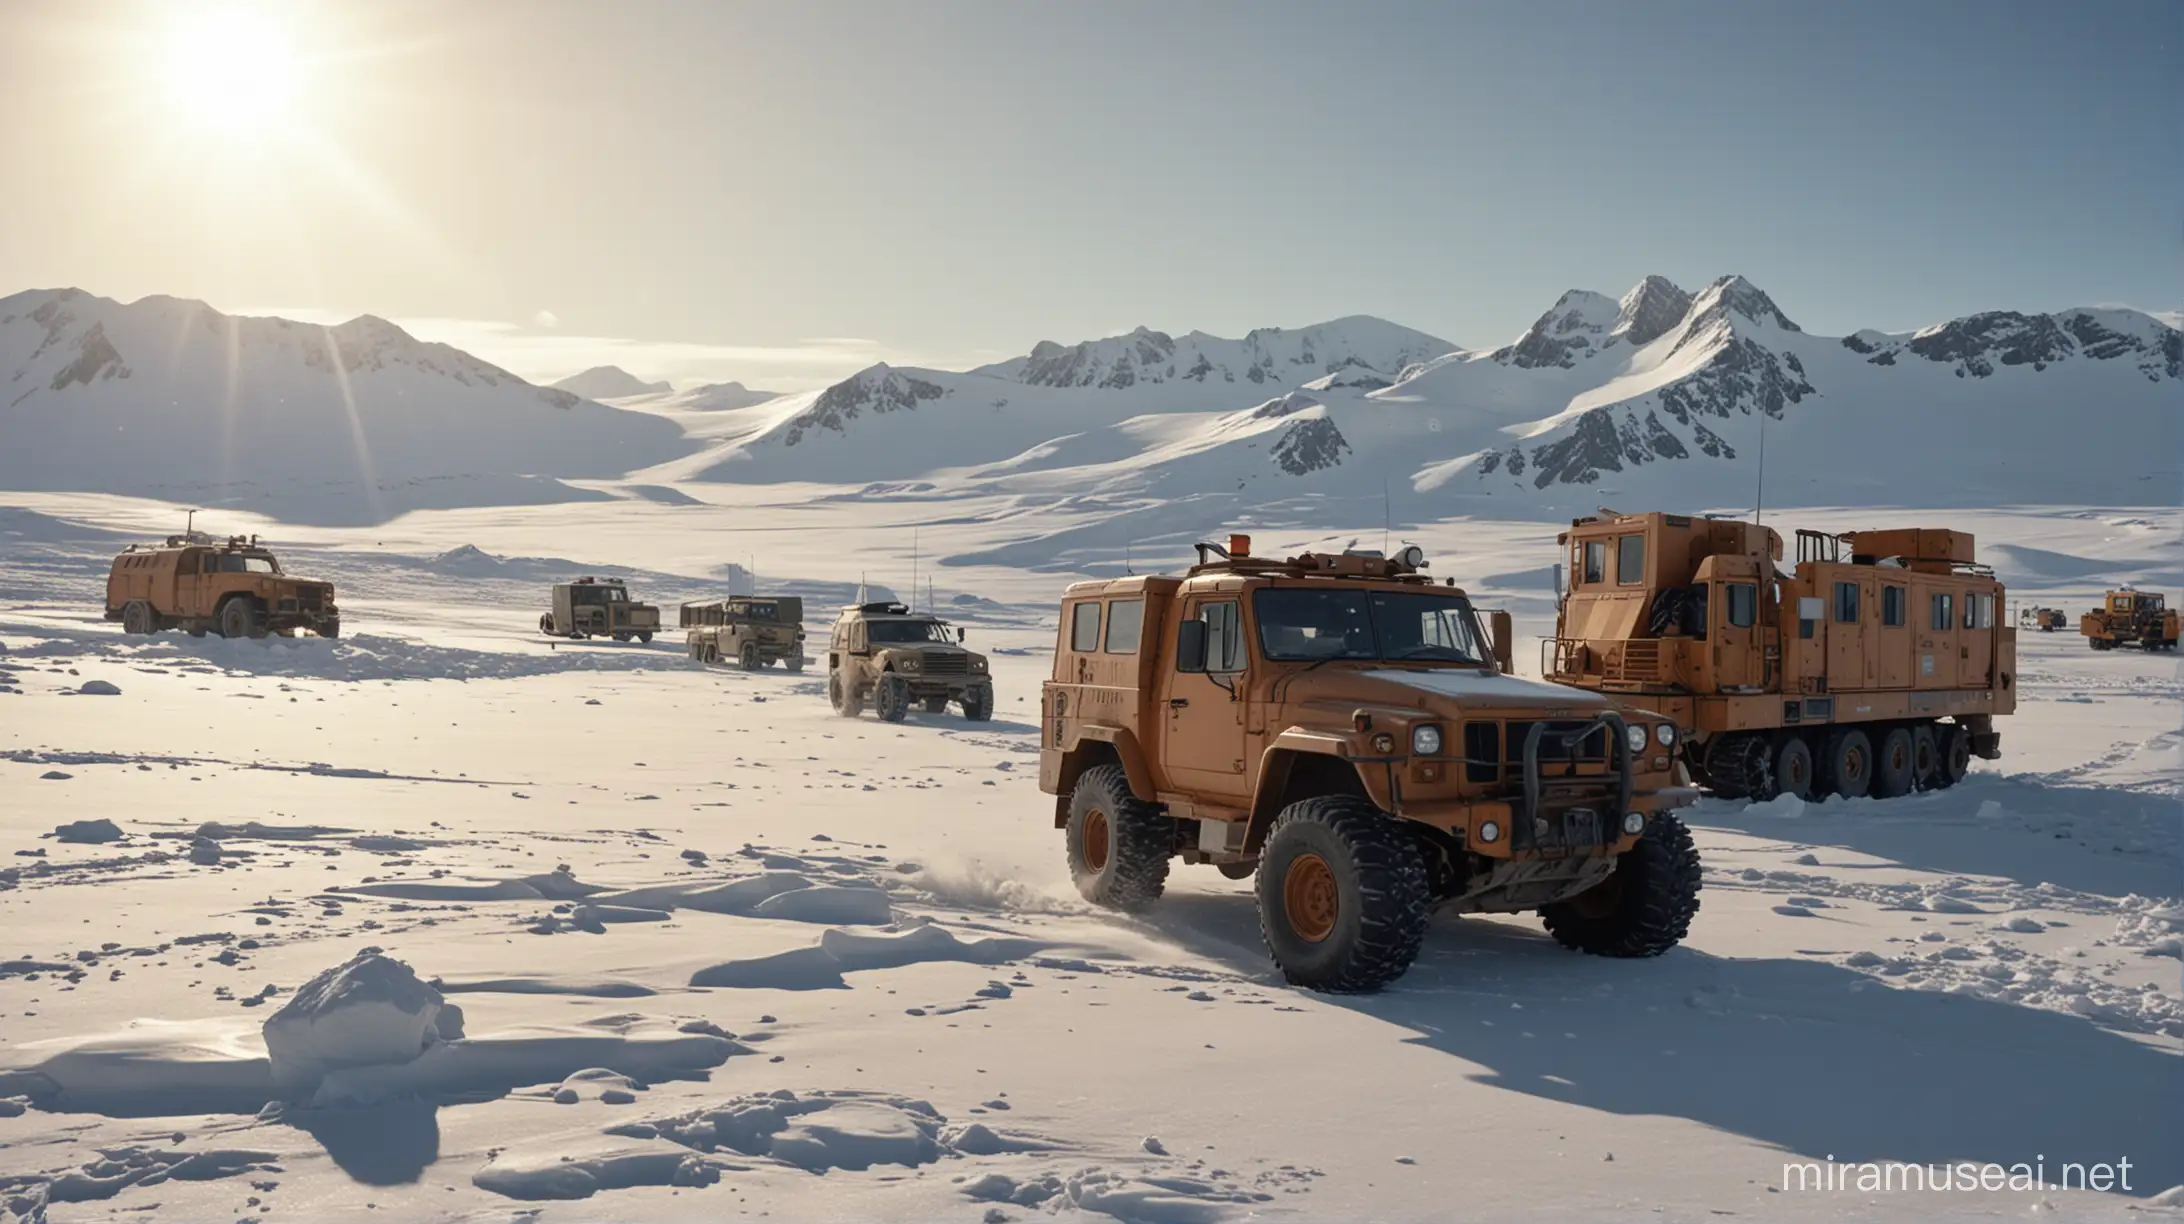 cinematic still, film by john carpenter, the thing, antarctica, low winter sun, snowcat, convoy, destroyed buildings in background